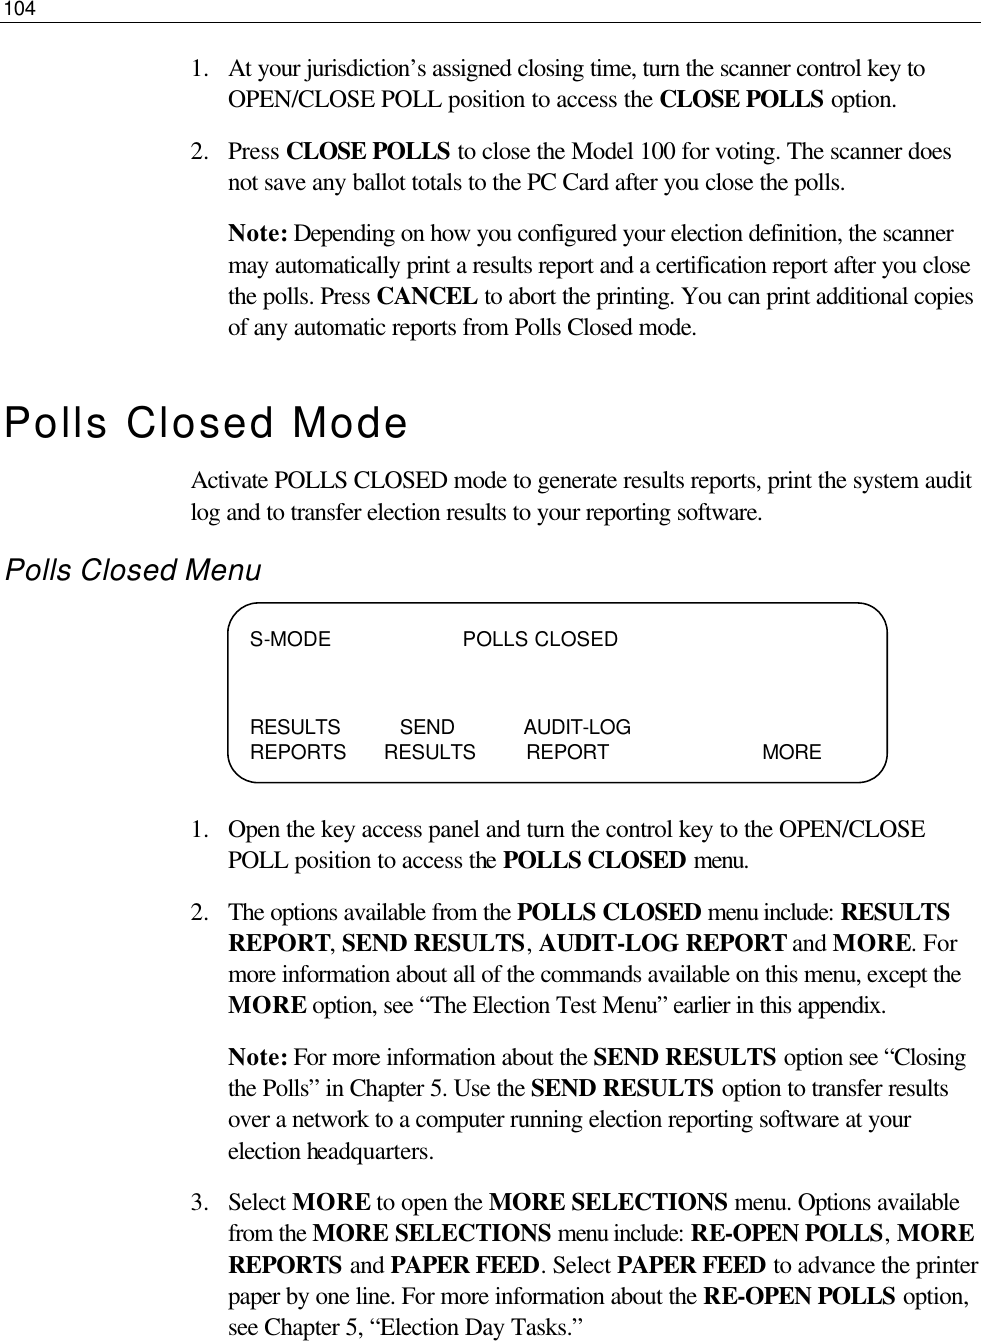 104  1.  At your jurisdiction’s assigned closing time, turn the scanner control key to OPEN/CLOSE POLL position to access the CLOSE POLLS option.  2.  Press CLOSE POLLS to close the Model 100 for voting. The scanner does not save any ballot totals to the PC Card after you close the polls. Note: Depending on how you configured your election definition, the scanner may automatically print a results report and a certification report after you close the polls. Press CANCEL to abort the printing. You can print additional copies of any automatic reports from Polls Closed mode. Polls Closed Mode Activate POLLS CLOSED mode to generate results reports, print the system audit log and to transfer election results to your reporting software.  Polls Closed Menu     1.  Open the key access panel and turn the control key to the OPEN/CLOSE POLL position to access the POLLS CLOSED menu. 2.  The options available from the POLLS CLOSED menu include: RESULTS REPORT, SEND RESULTS, AUDIT-LOG REPORT and MORE. For more information about all of the commands available on this menu, except the MORE option, see “The Election Test Menu” earlier in this appendix. Note: For more information about the SEND RESULTS option see “Closing the Polls” in Chapter 5. Use the SEND RESULTS option to transfer results over a network to a computer running election reporting software at your election headquarters.  3.  Select MORE to open the MORE SELECTIONS menu. Options available from the MORE SELECTIONS menu include: RE-OPEN POLLS, MORE REPORTS and PAPER FEED. Select PAPER FEED to advance the printer paper by one line. For more information about the RE-OPEN POLLS option, see Chapter 5, “Election Day Tasks.” S-MODE                     POLLS CLOSED   RESULTS SEND           AUDIT-LOG              REPORTS      RESULTS        REPORT                   MORE 